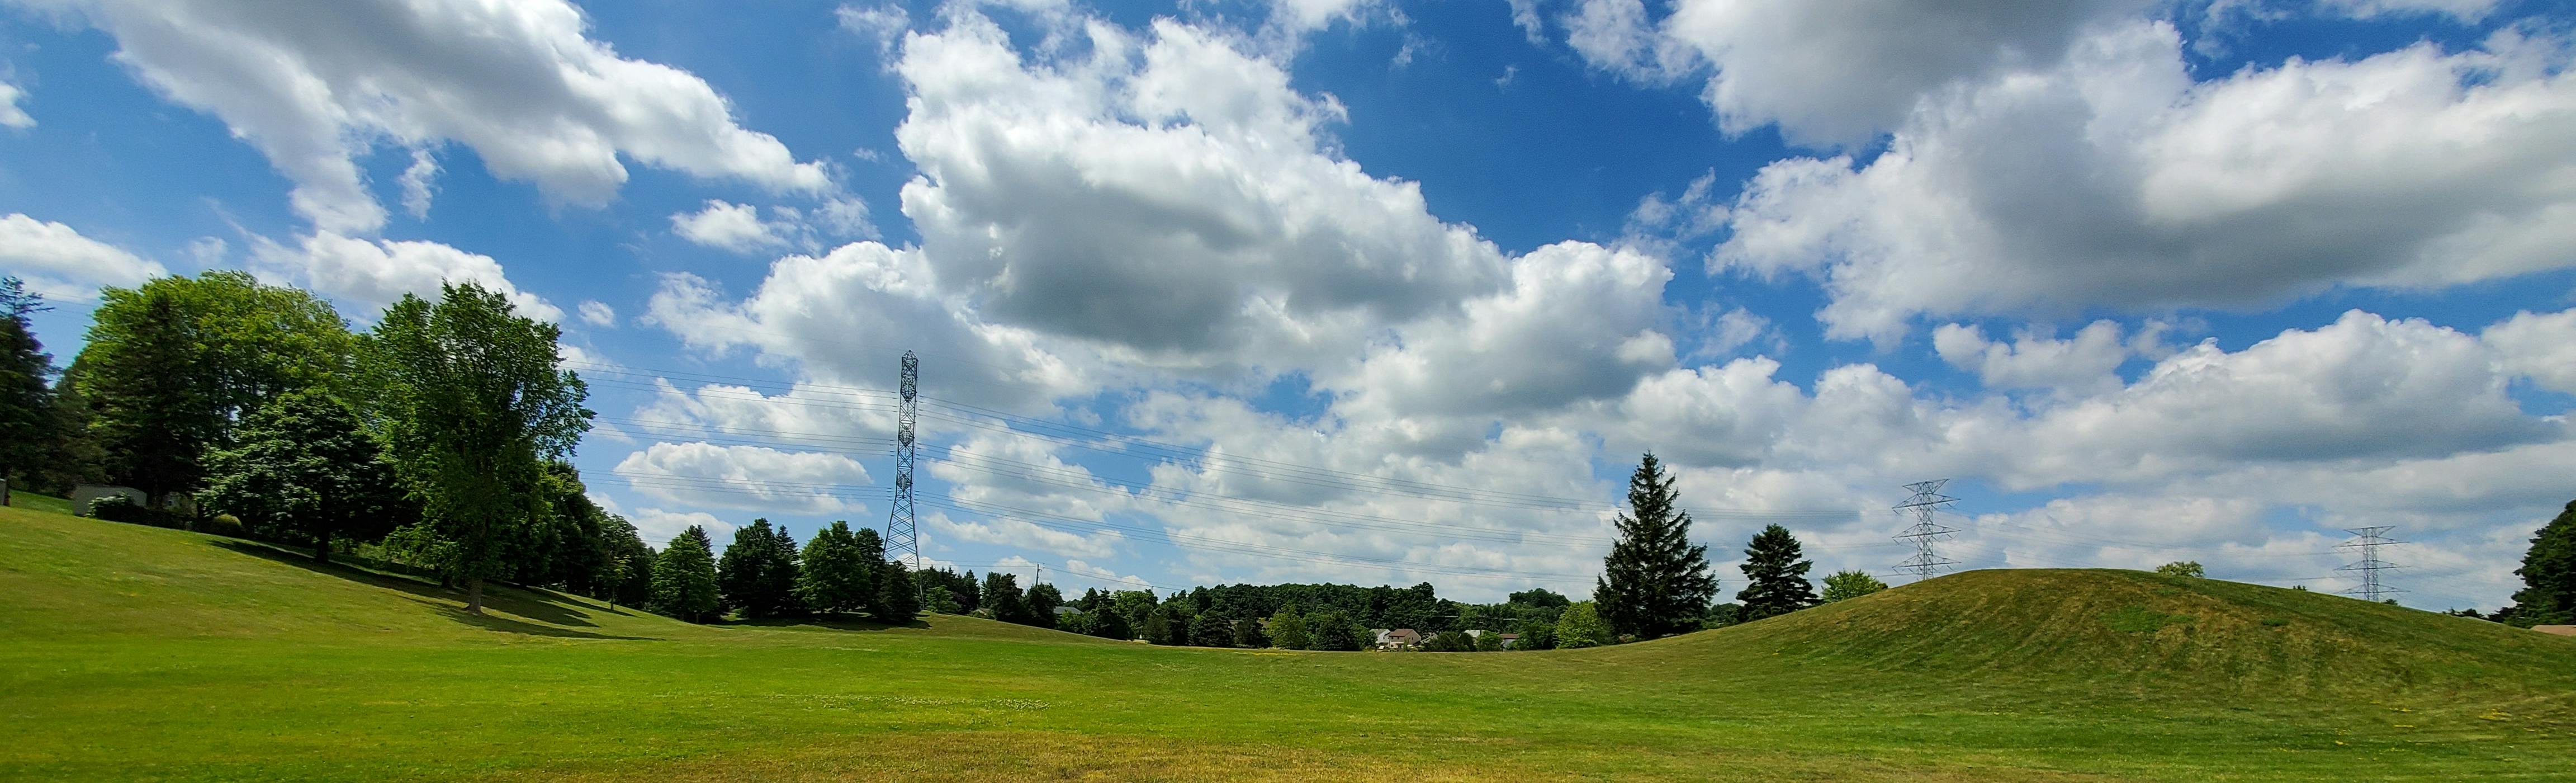 Field with hill and trees in the distance and blue sky with fluffy clouds overhead